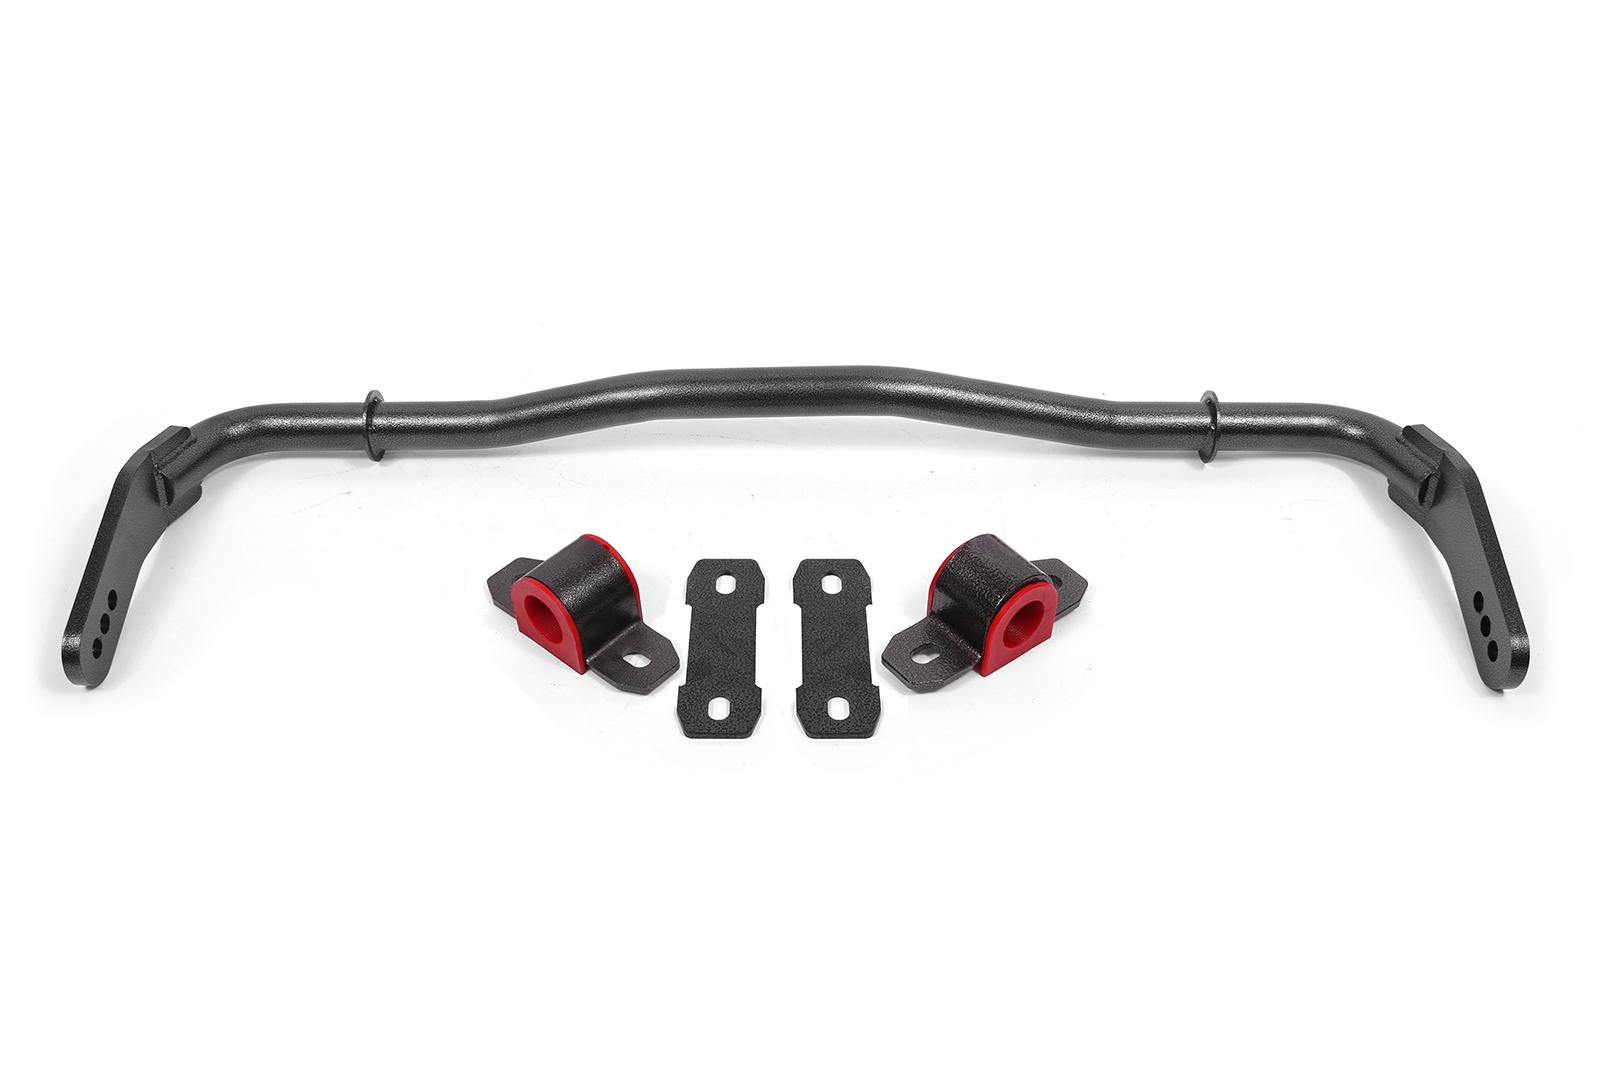 sway-bar-kit-front-hollow-38mm-adjustable-1-2